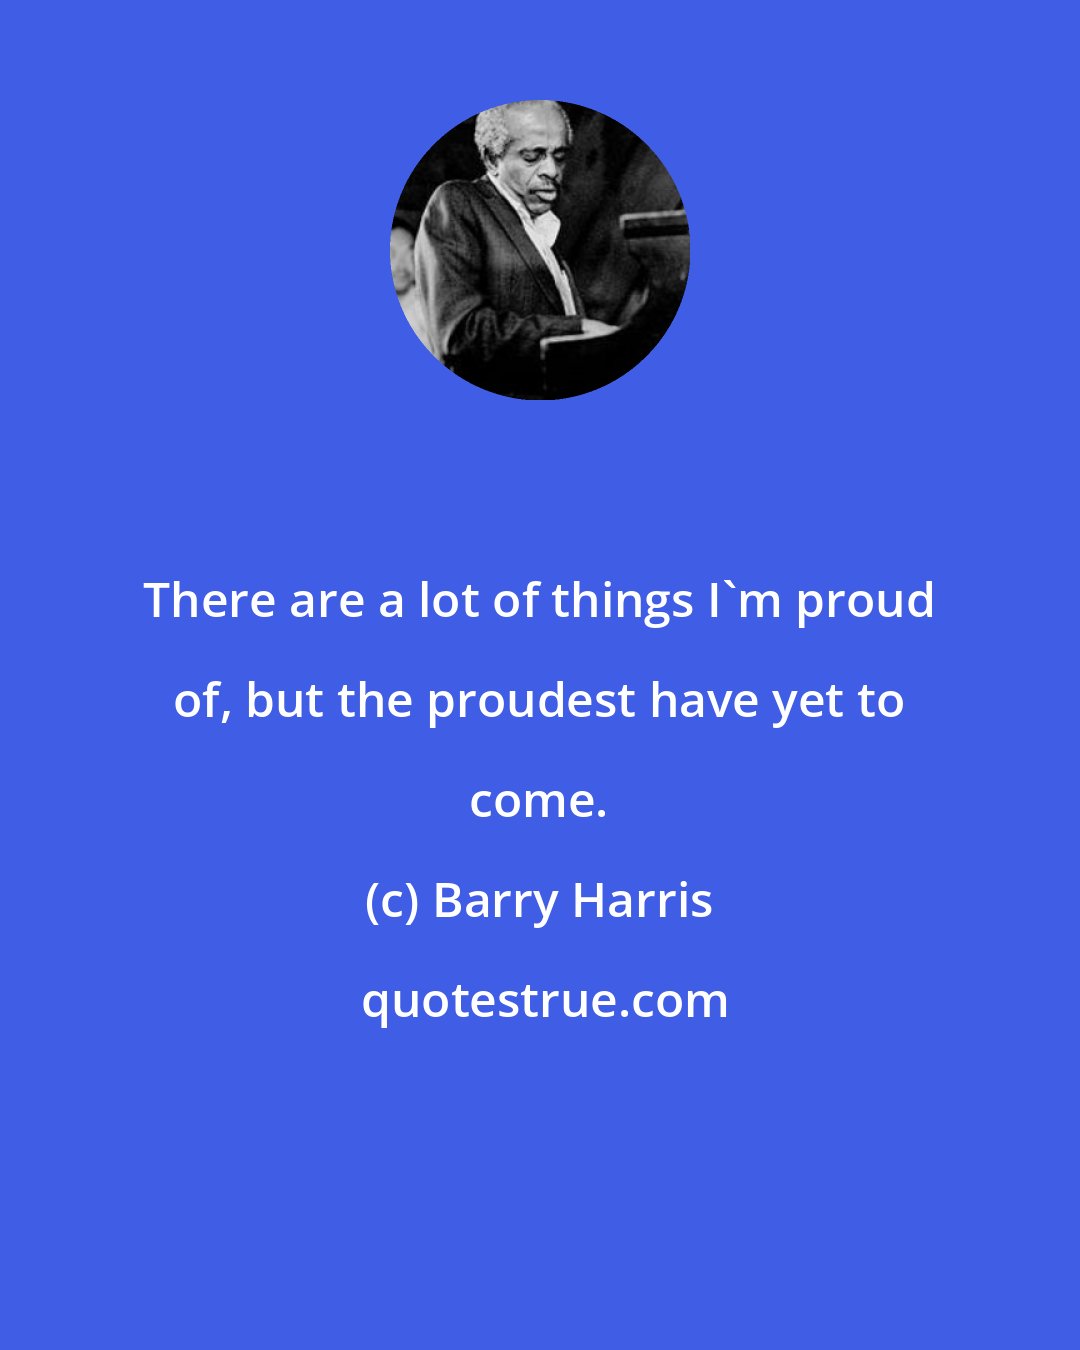 Barry Harris: There are a lot of things I'm proud of, but the proudest have yet to come.